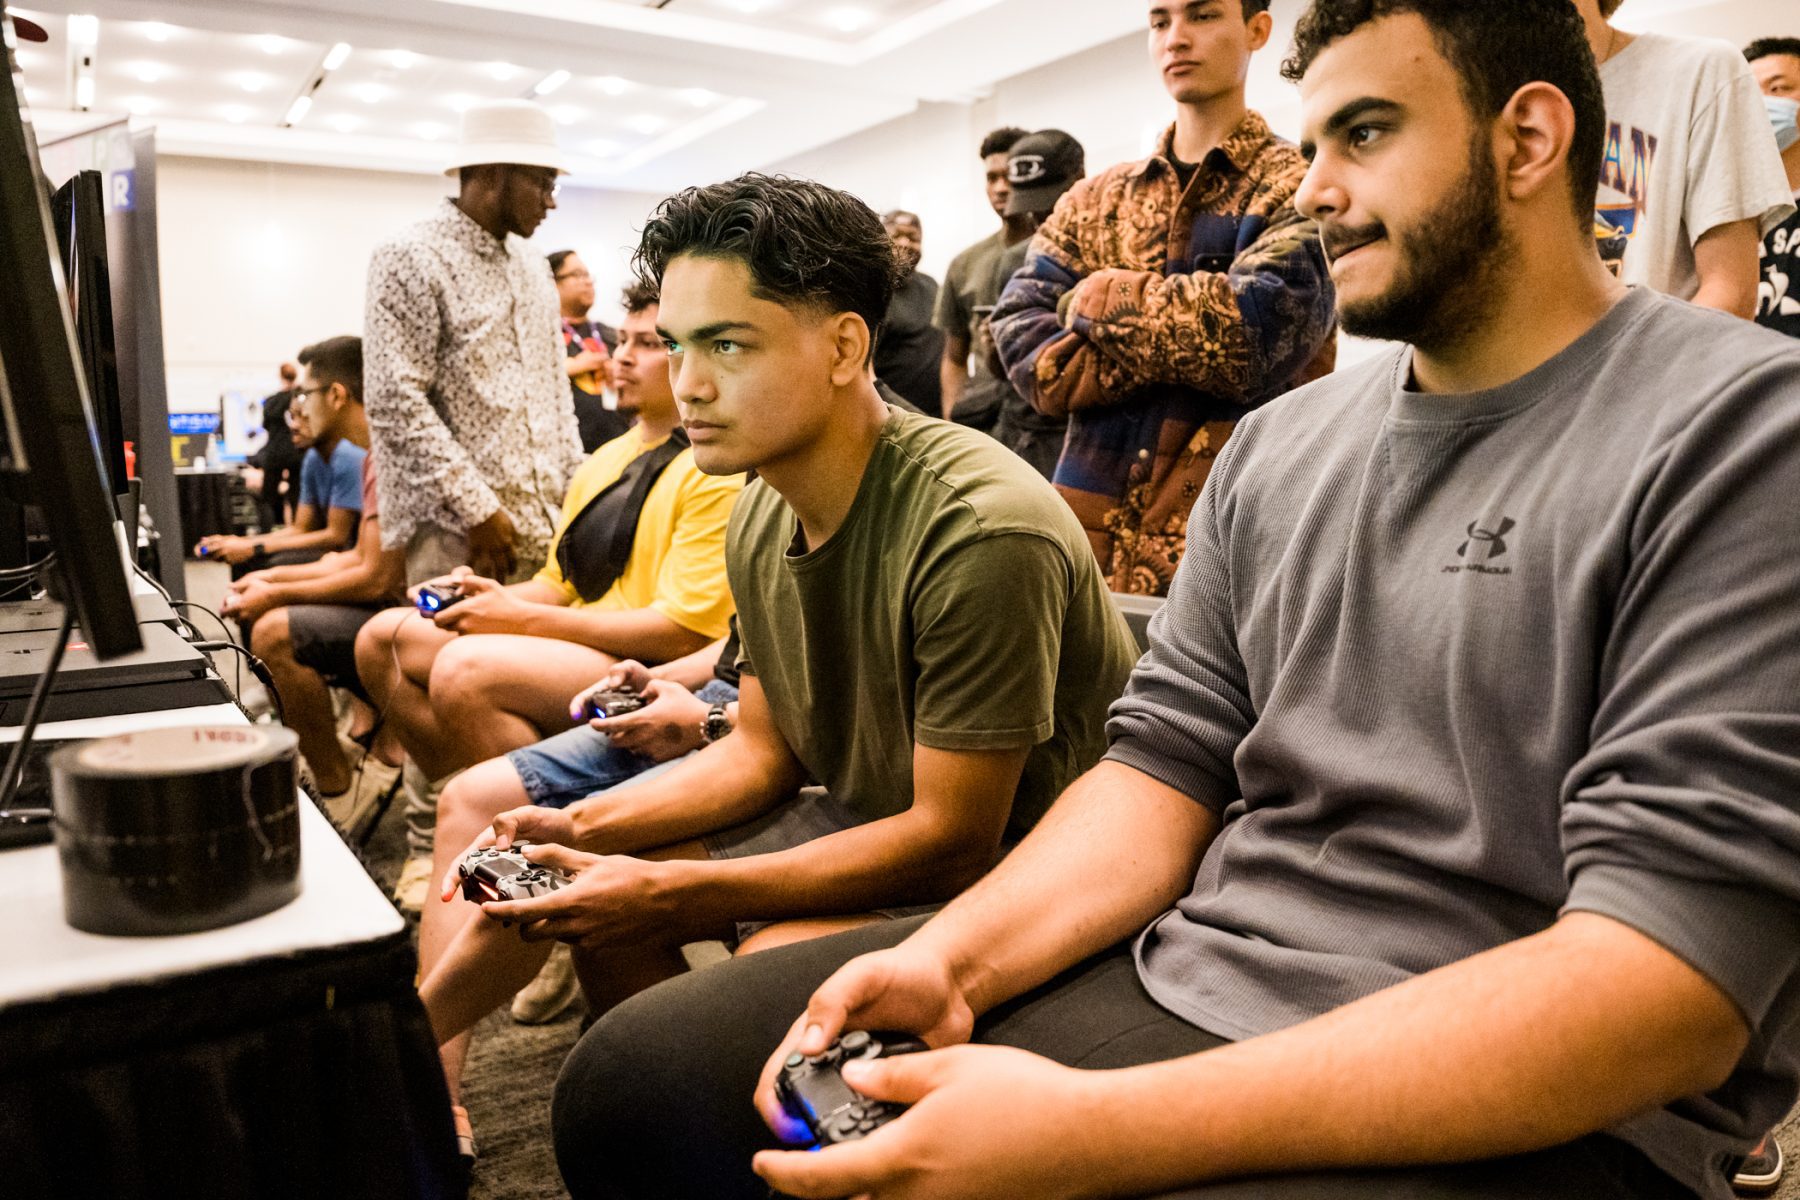 A group of people playing video games in a room.